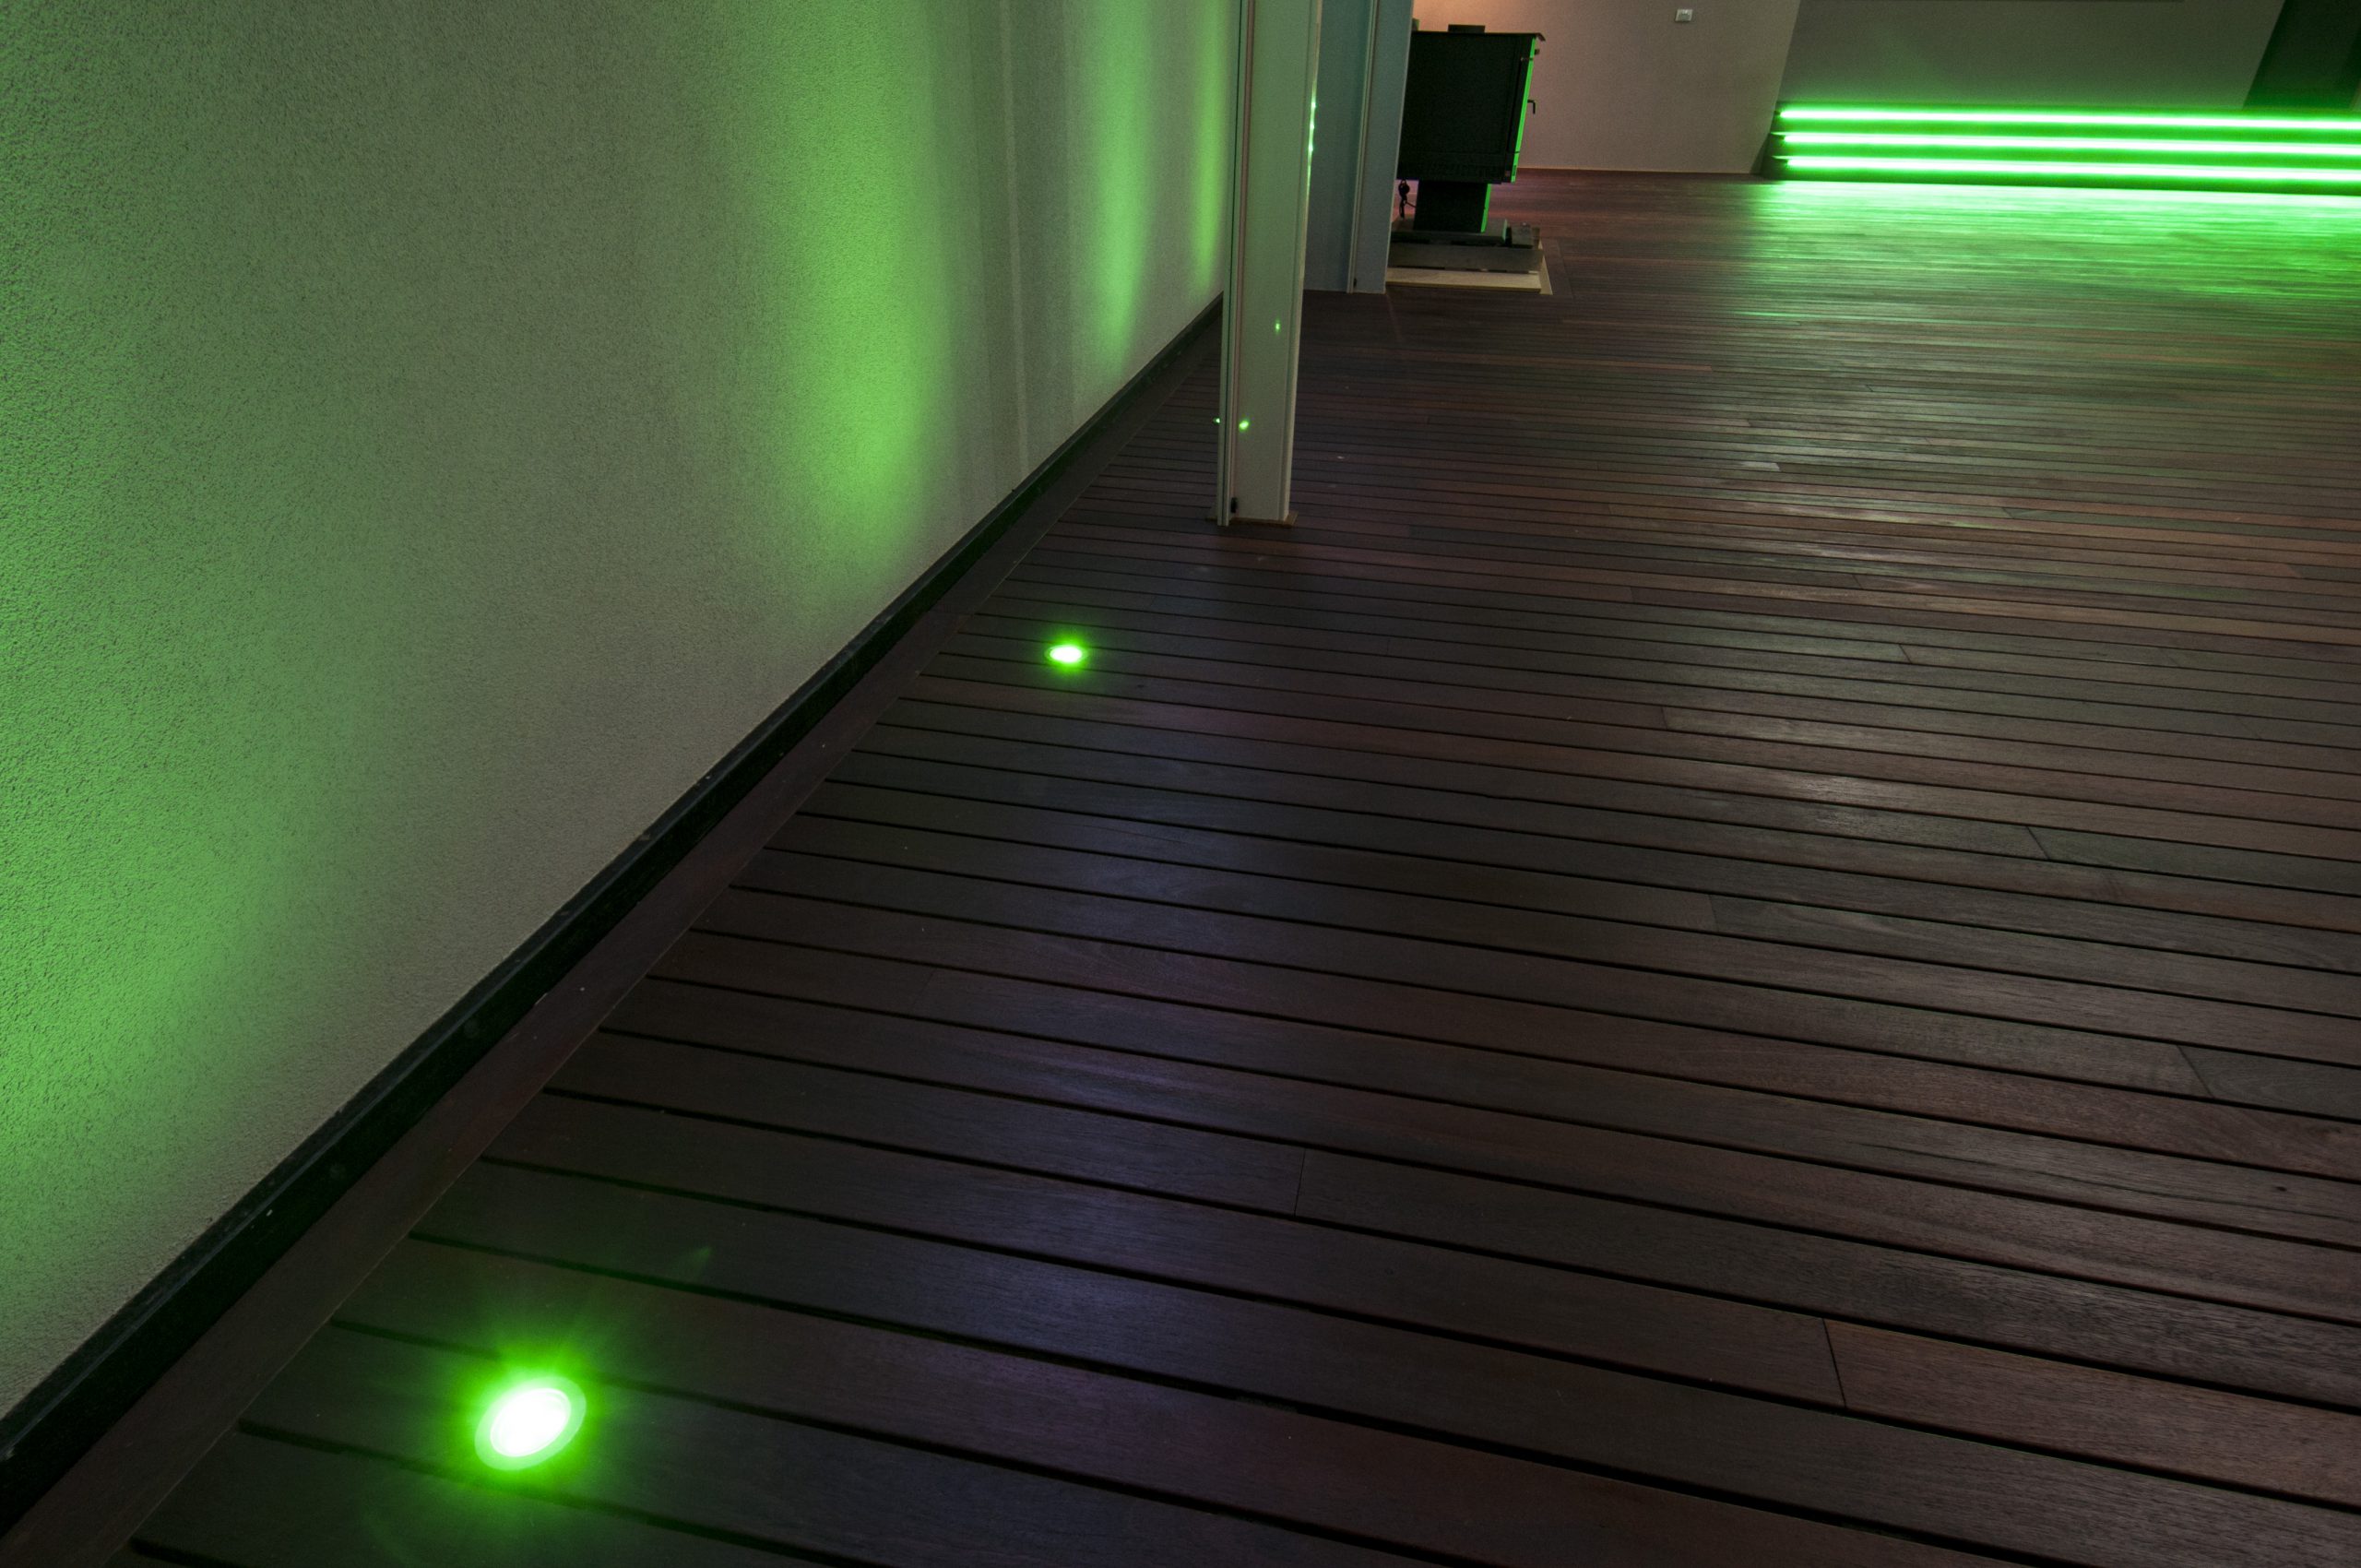 11-Colour-changing-deck-uplights-scaled